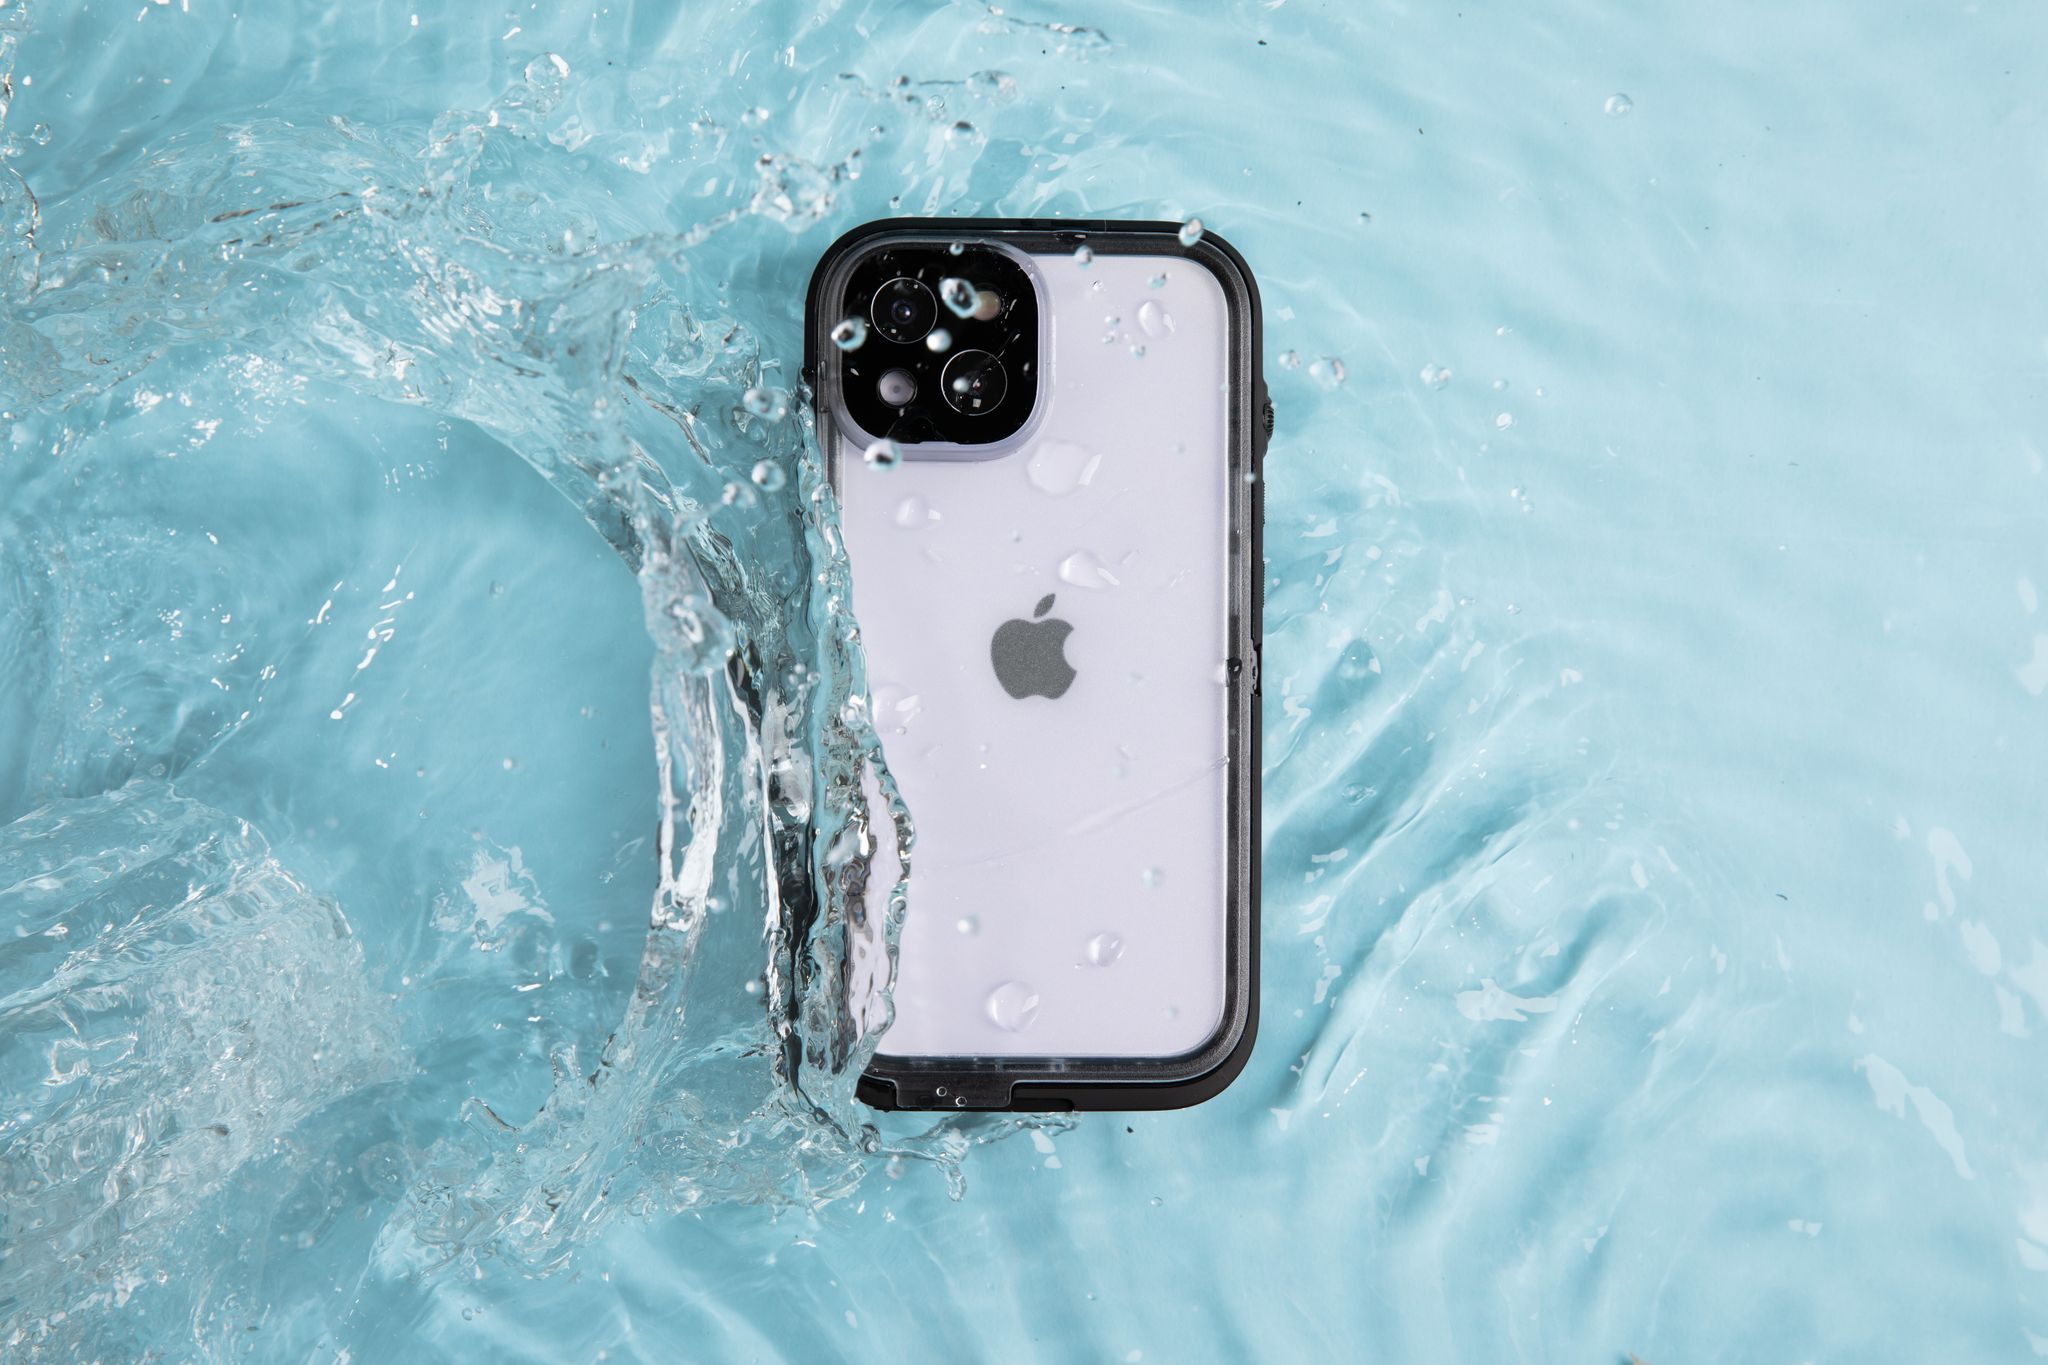 case for iphone 11